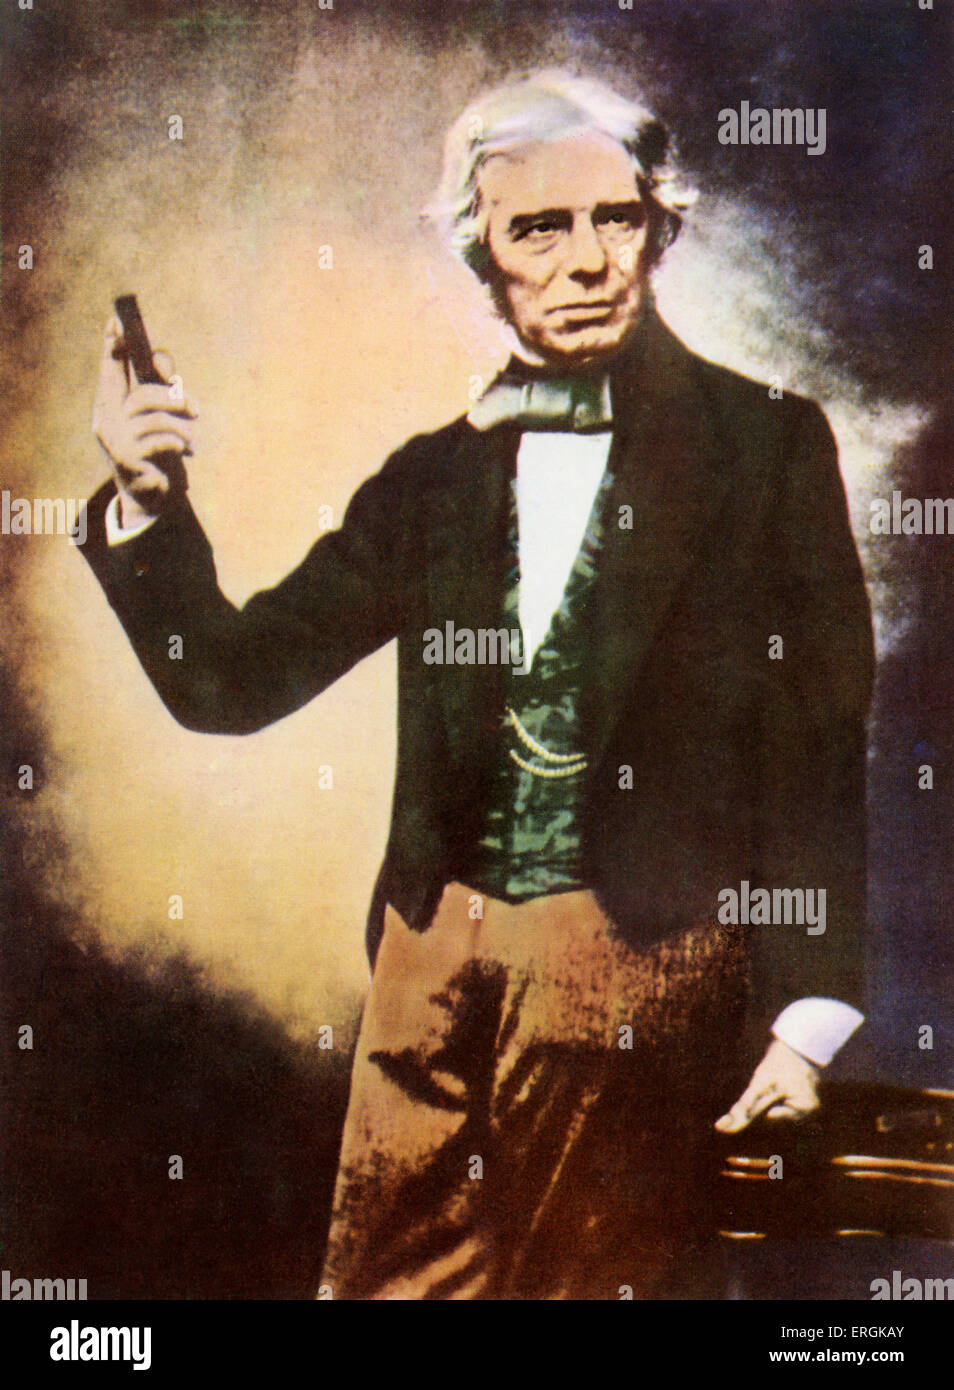 Michael Faraday (1791-1867). Michael Faraday experimented in the field of electromagnetism. Caption reads: 'Michael Faraday'. Stock Photo